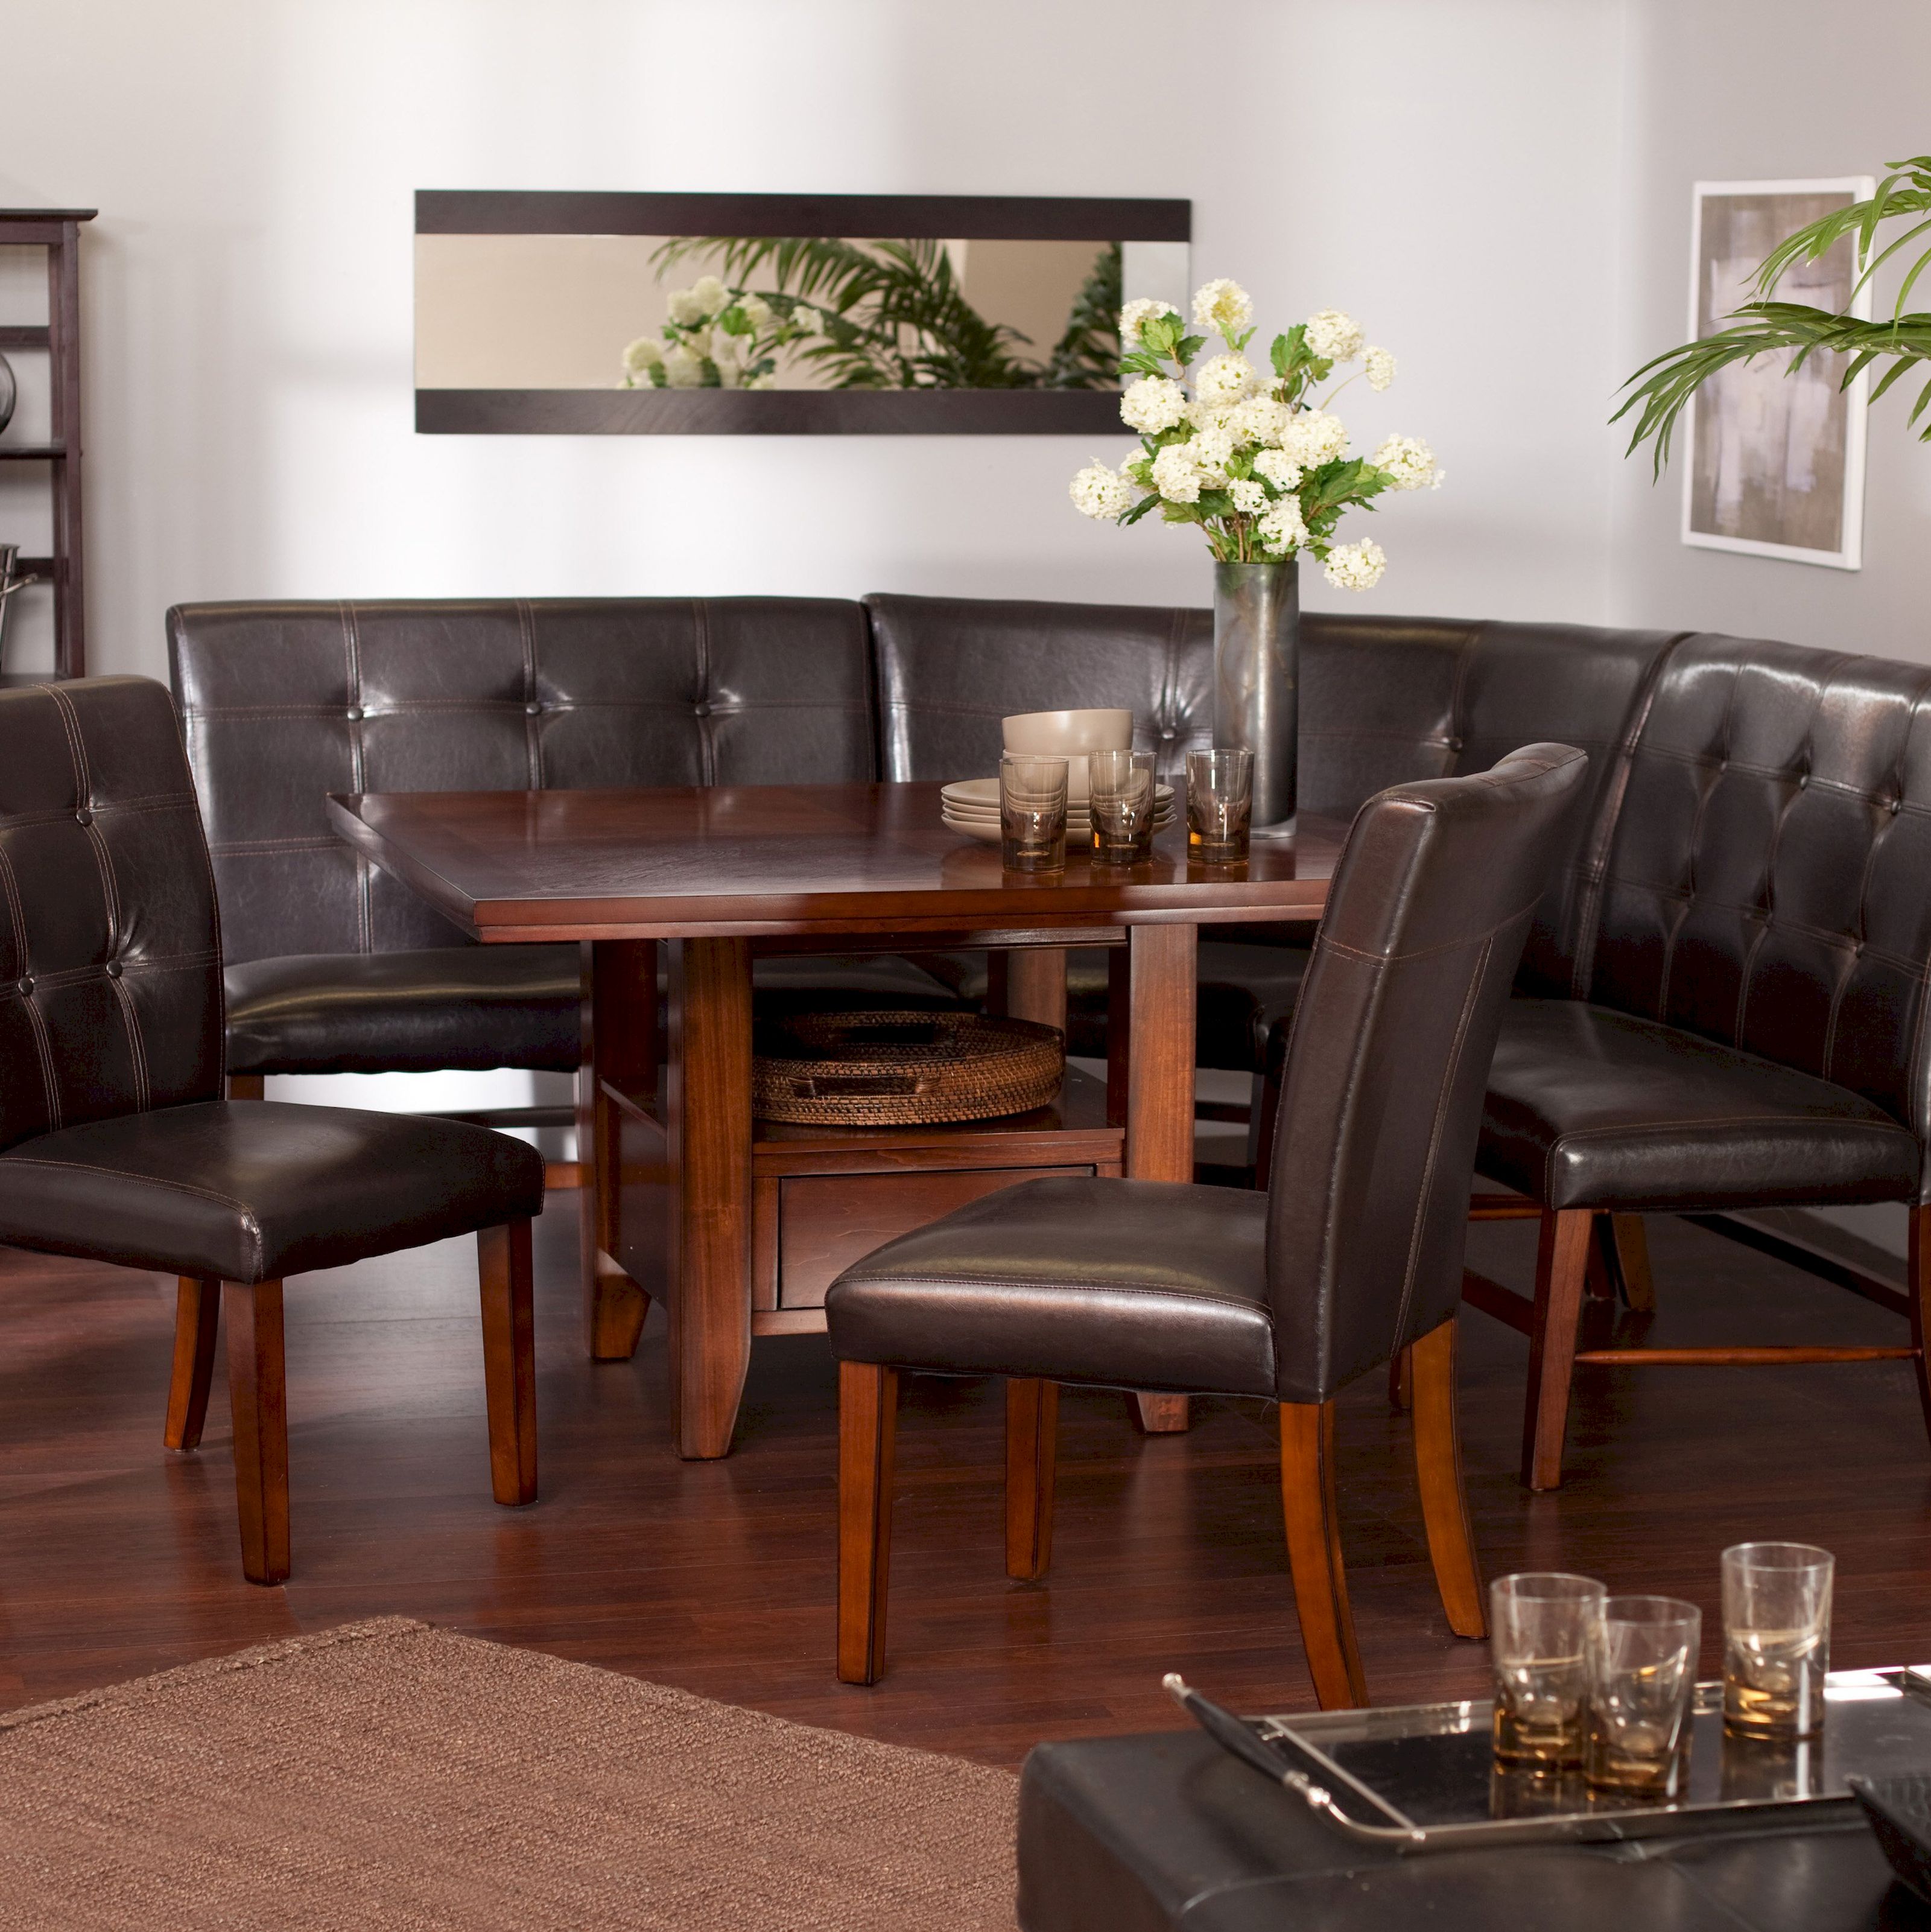 Brown Leather Kitchen Chairs photo - 4